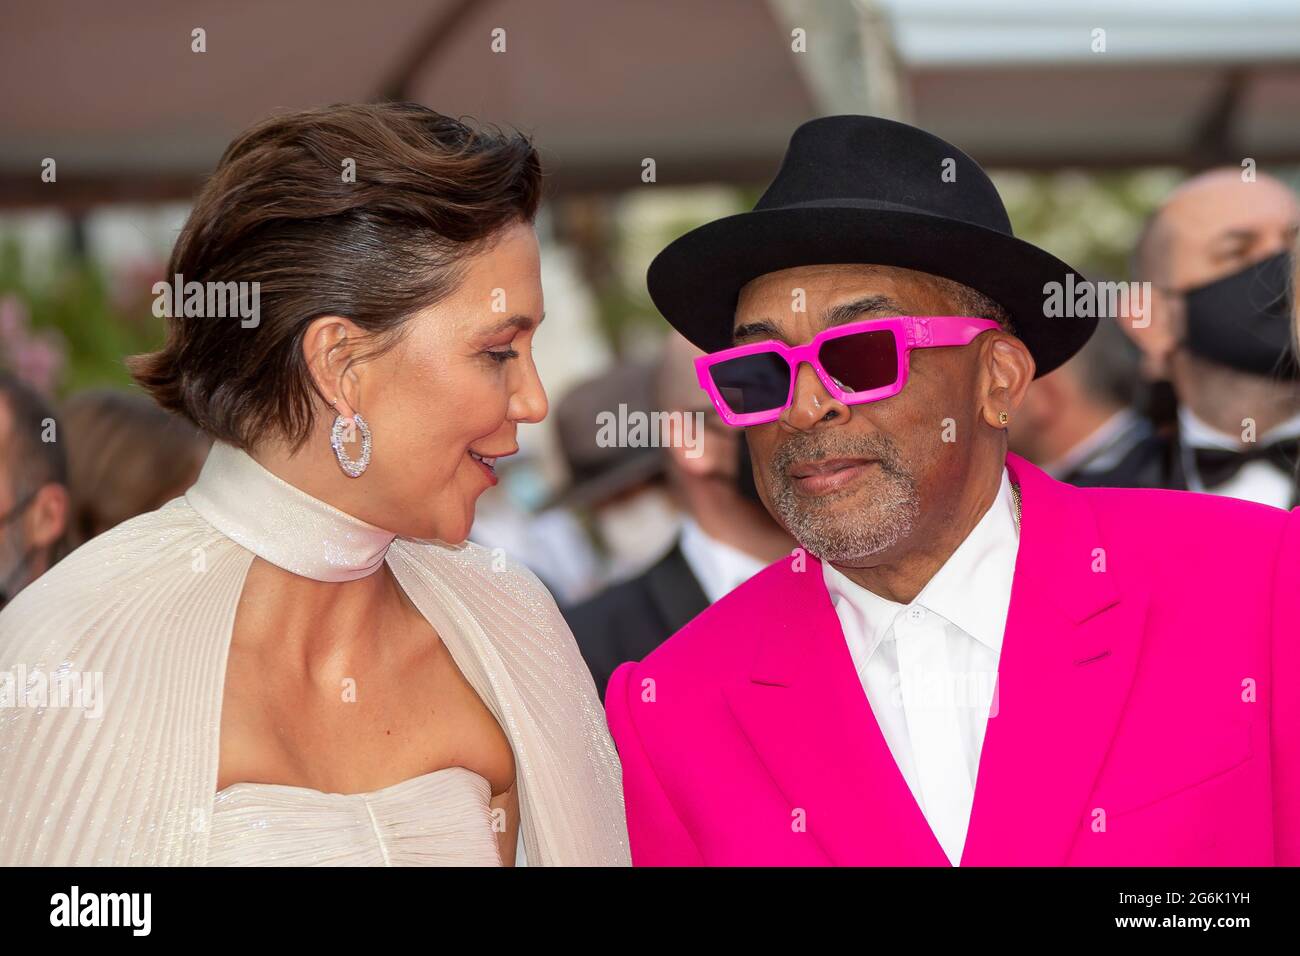 Cannes, France. 06th July, 2021. jury president Spike Lee and jury member Maggie Gyllenhaal and Song Kang-ho attend the 'Annette' screening and opening ceremony during the 74th annual Cannes Film Festival on July 06, 2021 in Cannes, France. Photo: Franck Boham/imageSPACE. Credit: Imagespace/Alamy Live News Stock Photo